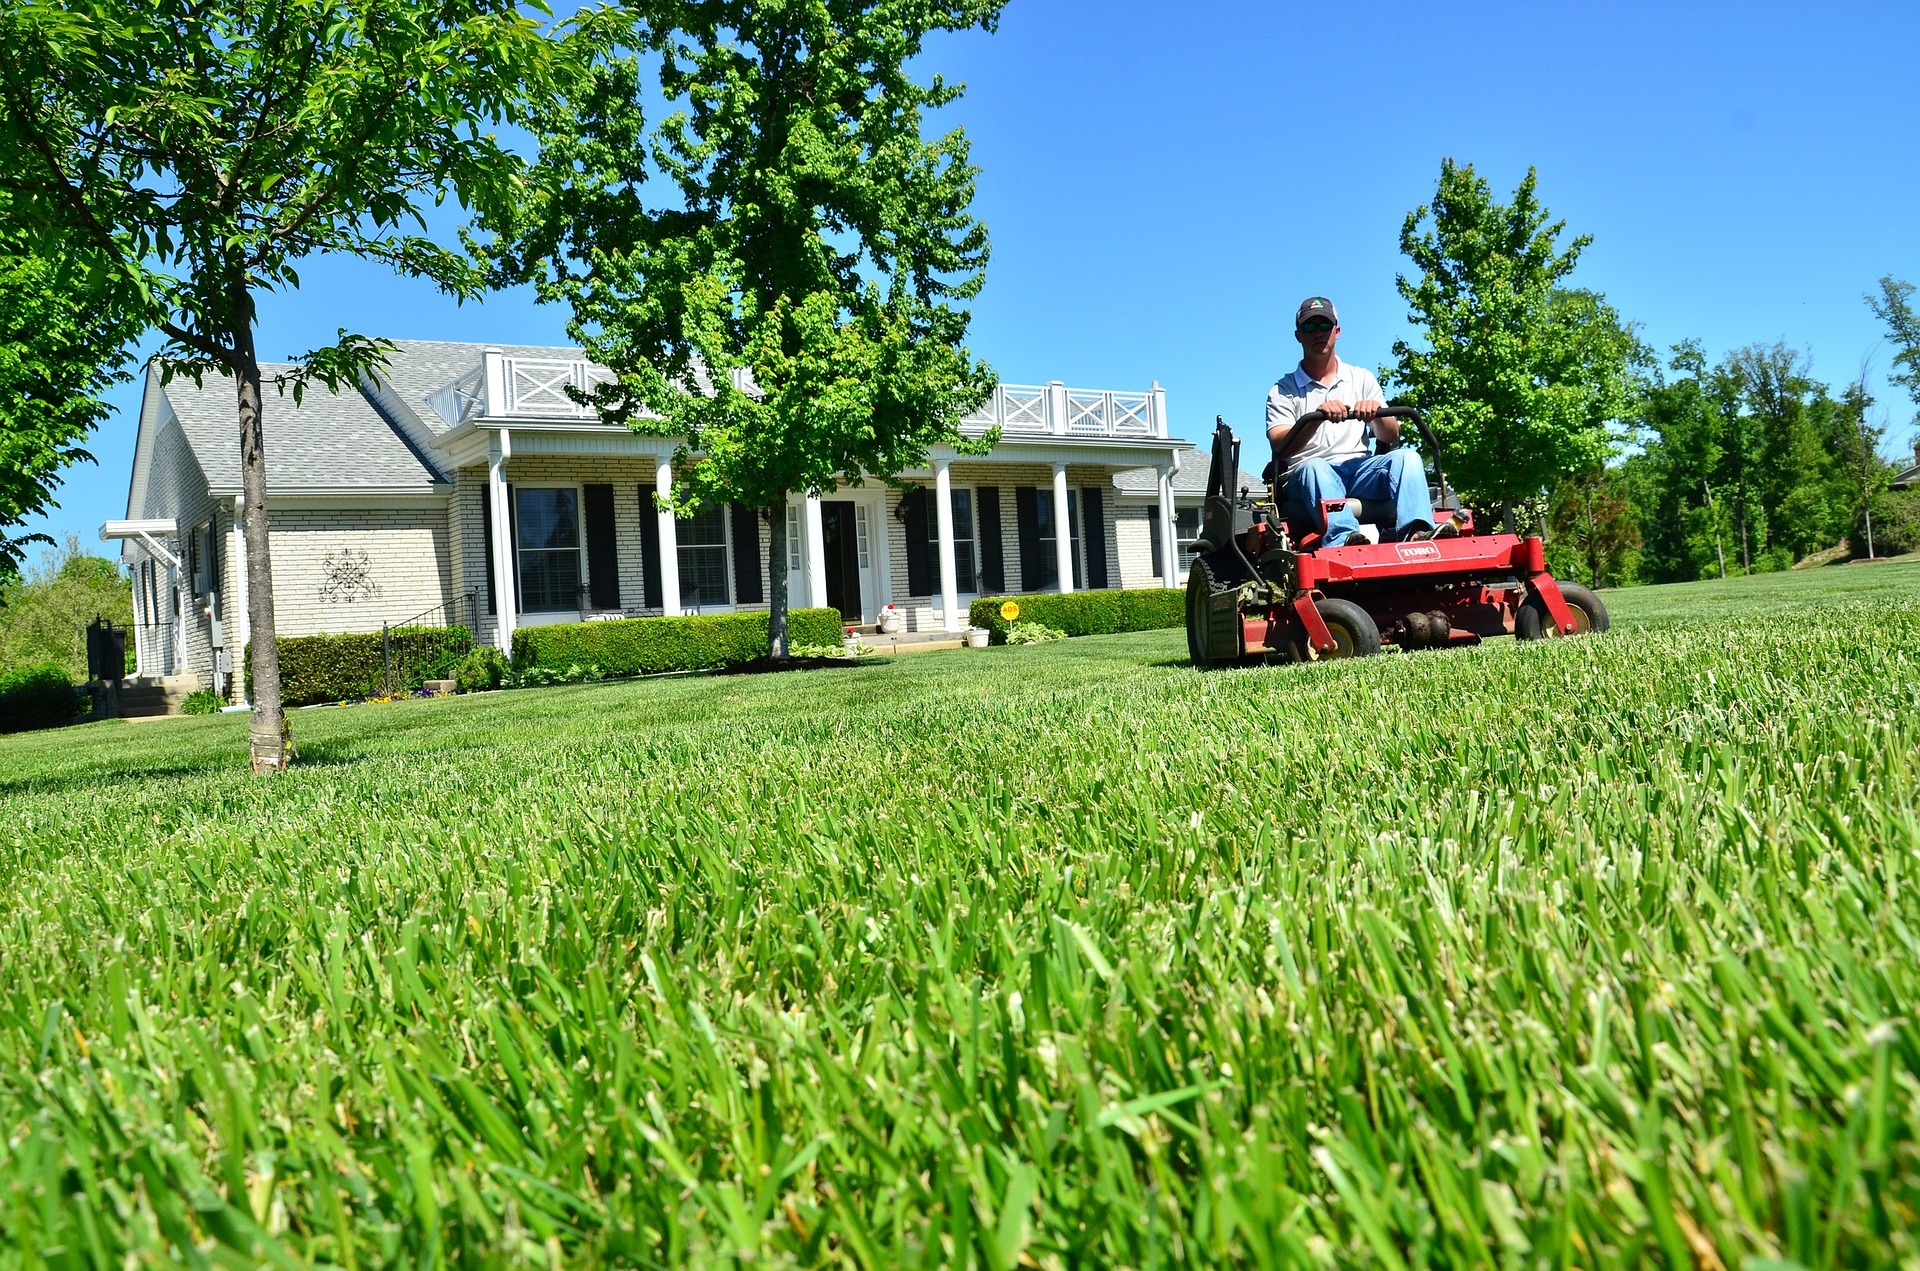 Cutting lawn on riding mower in front of house.